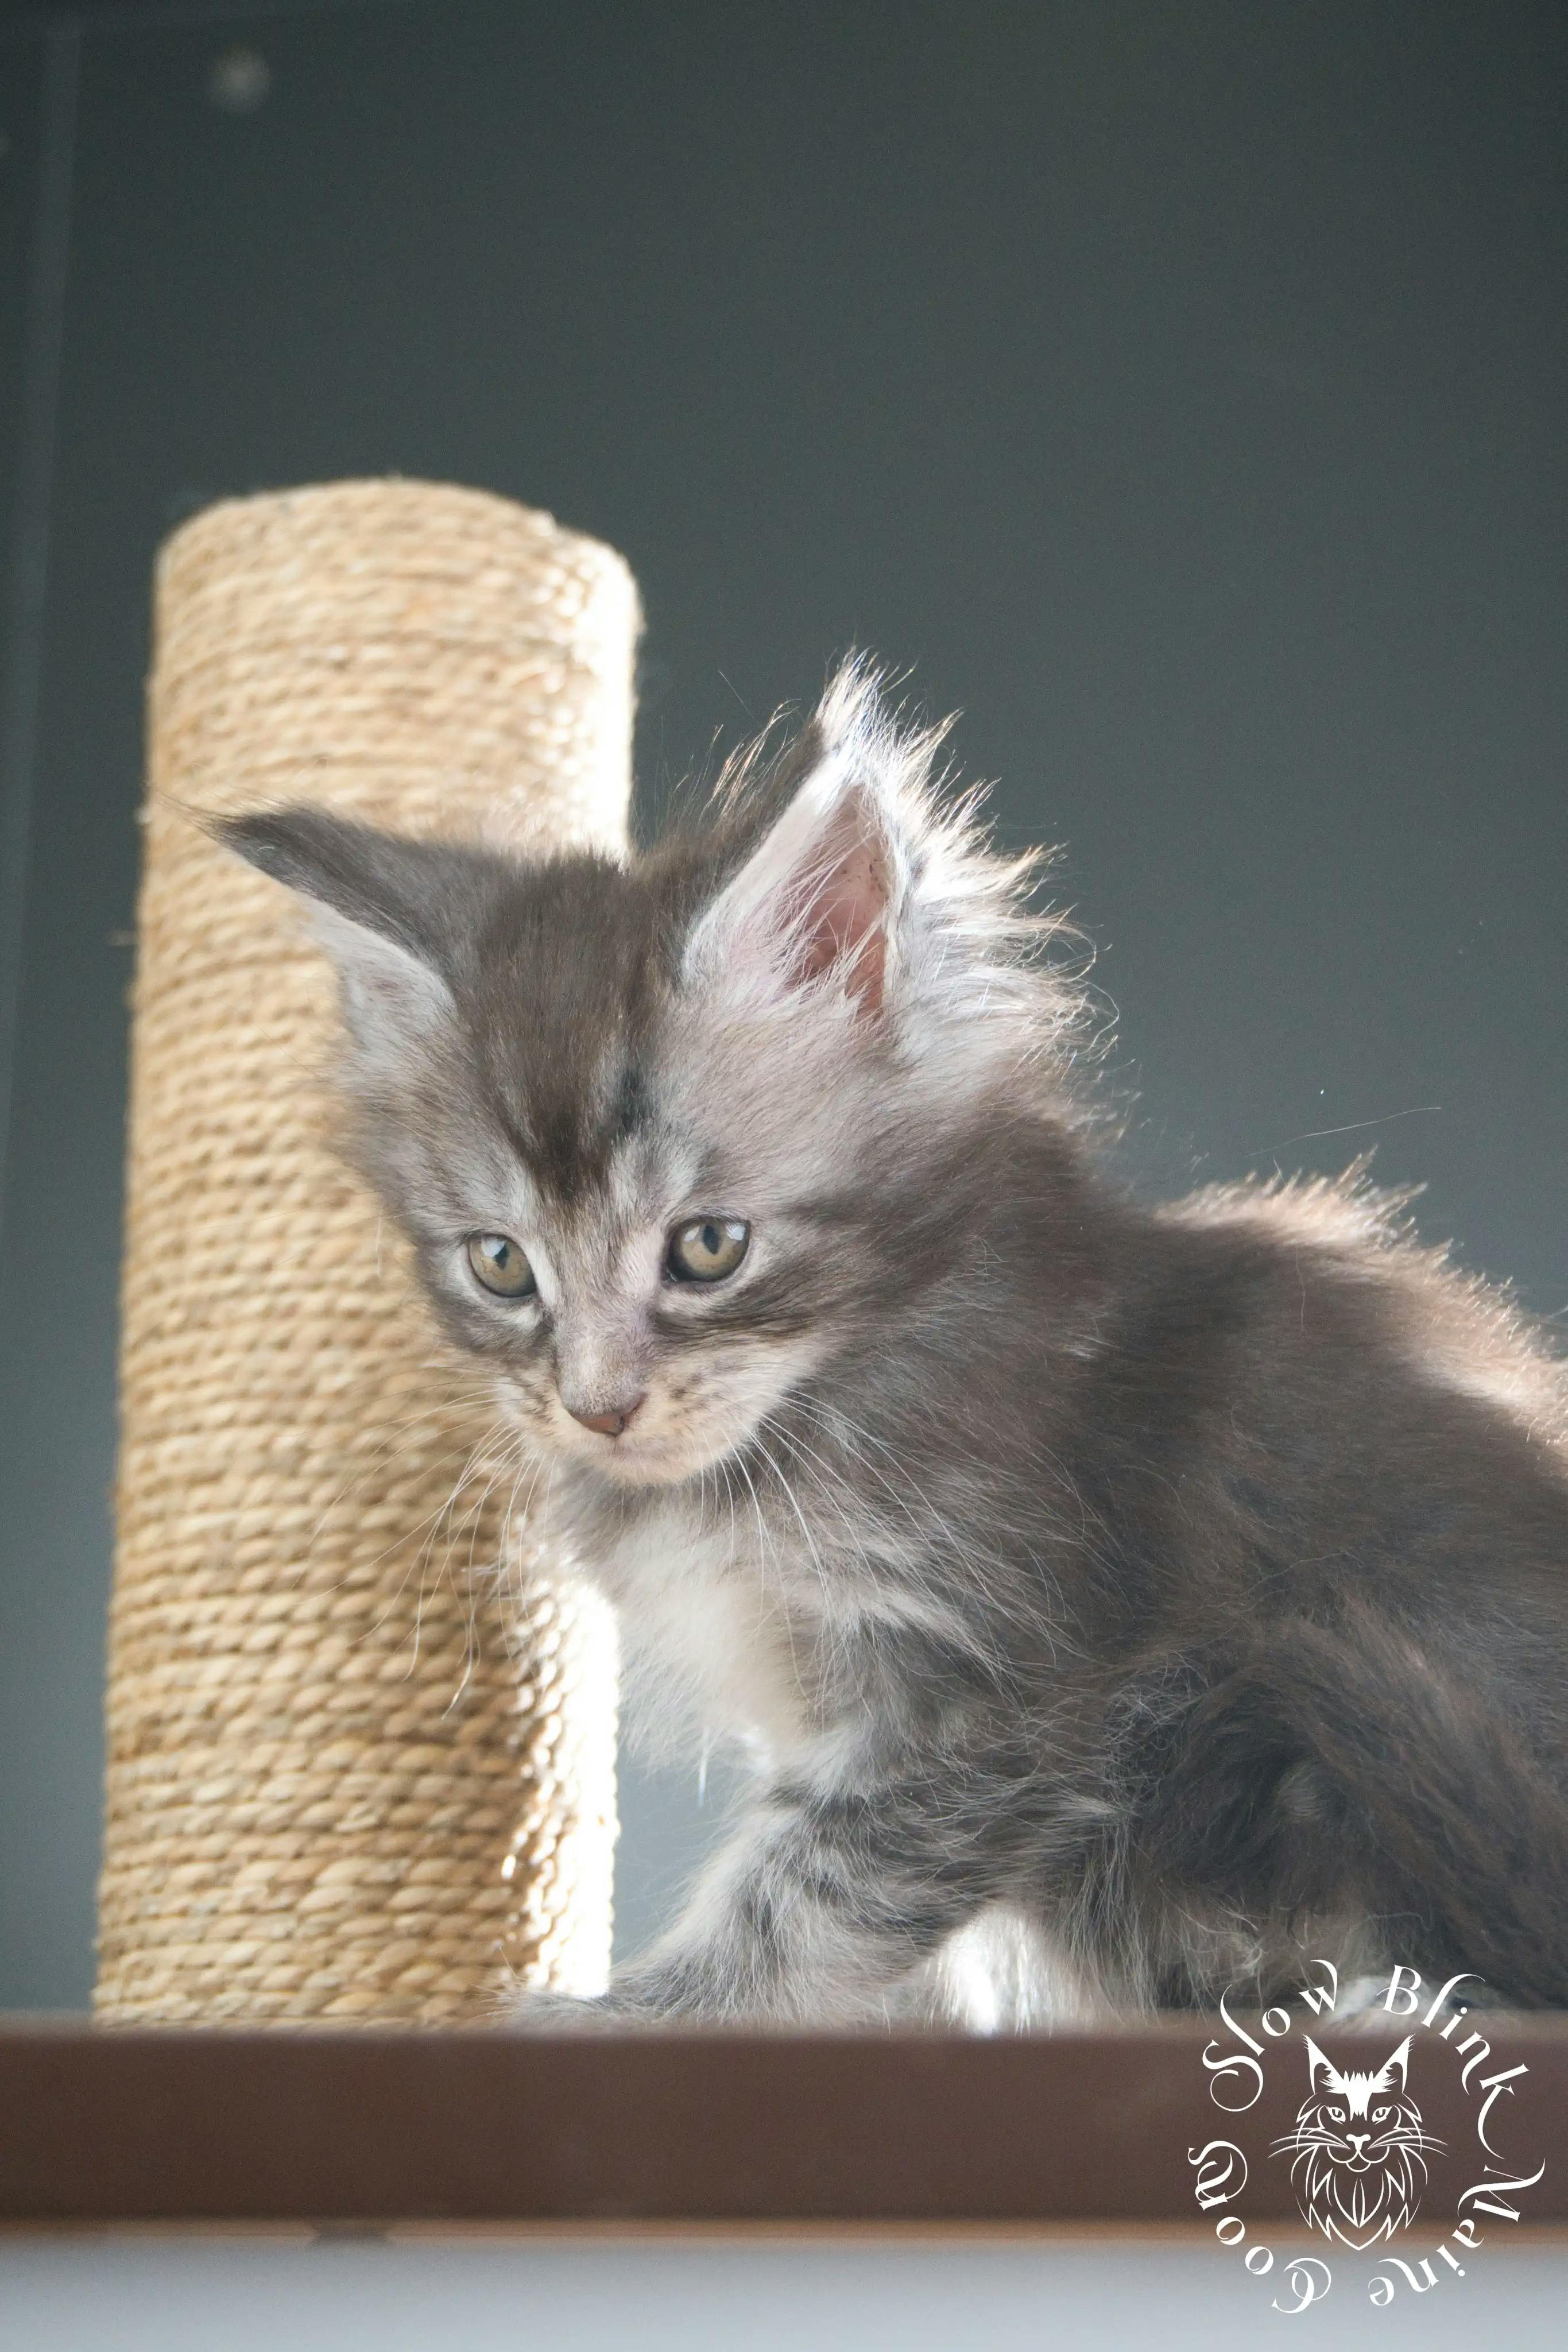 Blue Silver Tabby Maine Coon Kittens > blue silver tabby maine coon kitten | slowblinkmainecoons | 305